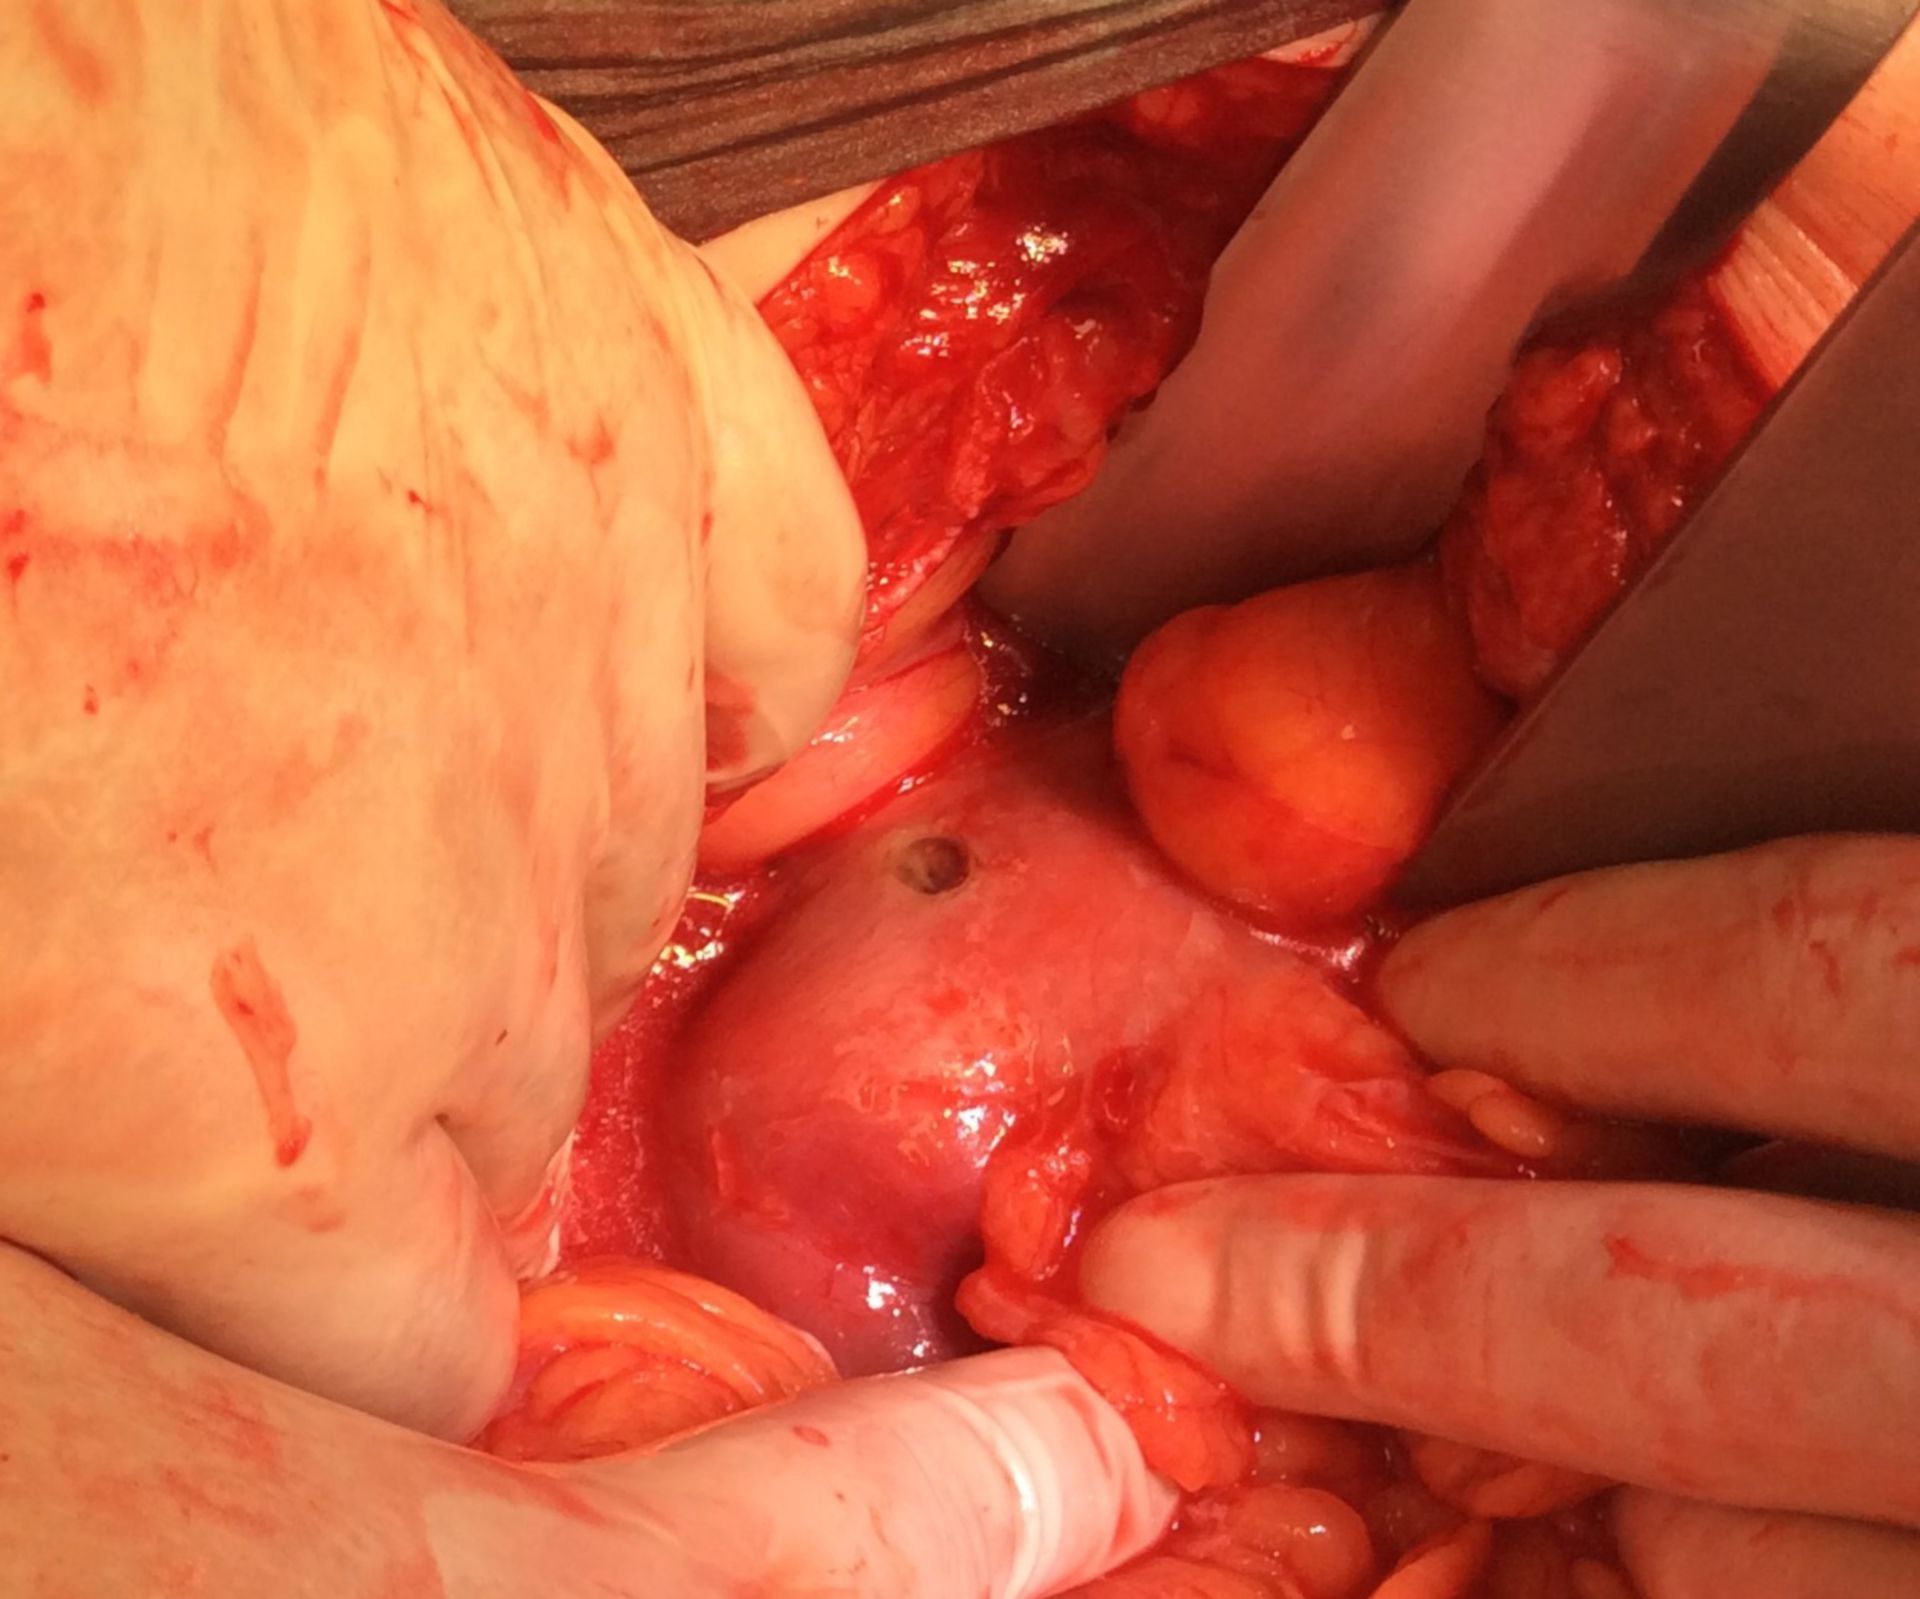 Duodenal ulcer - perforation